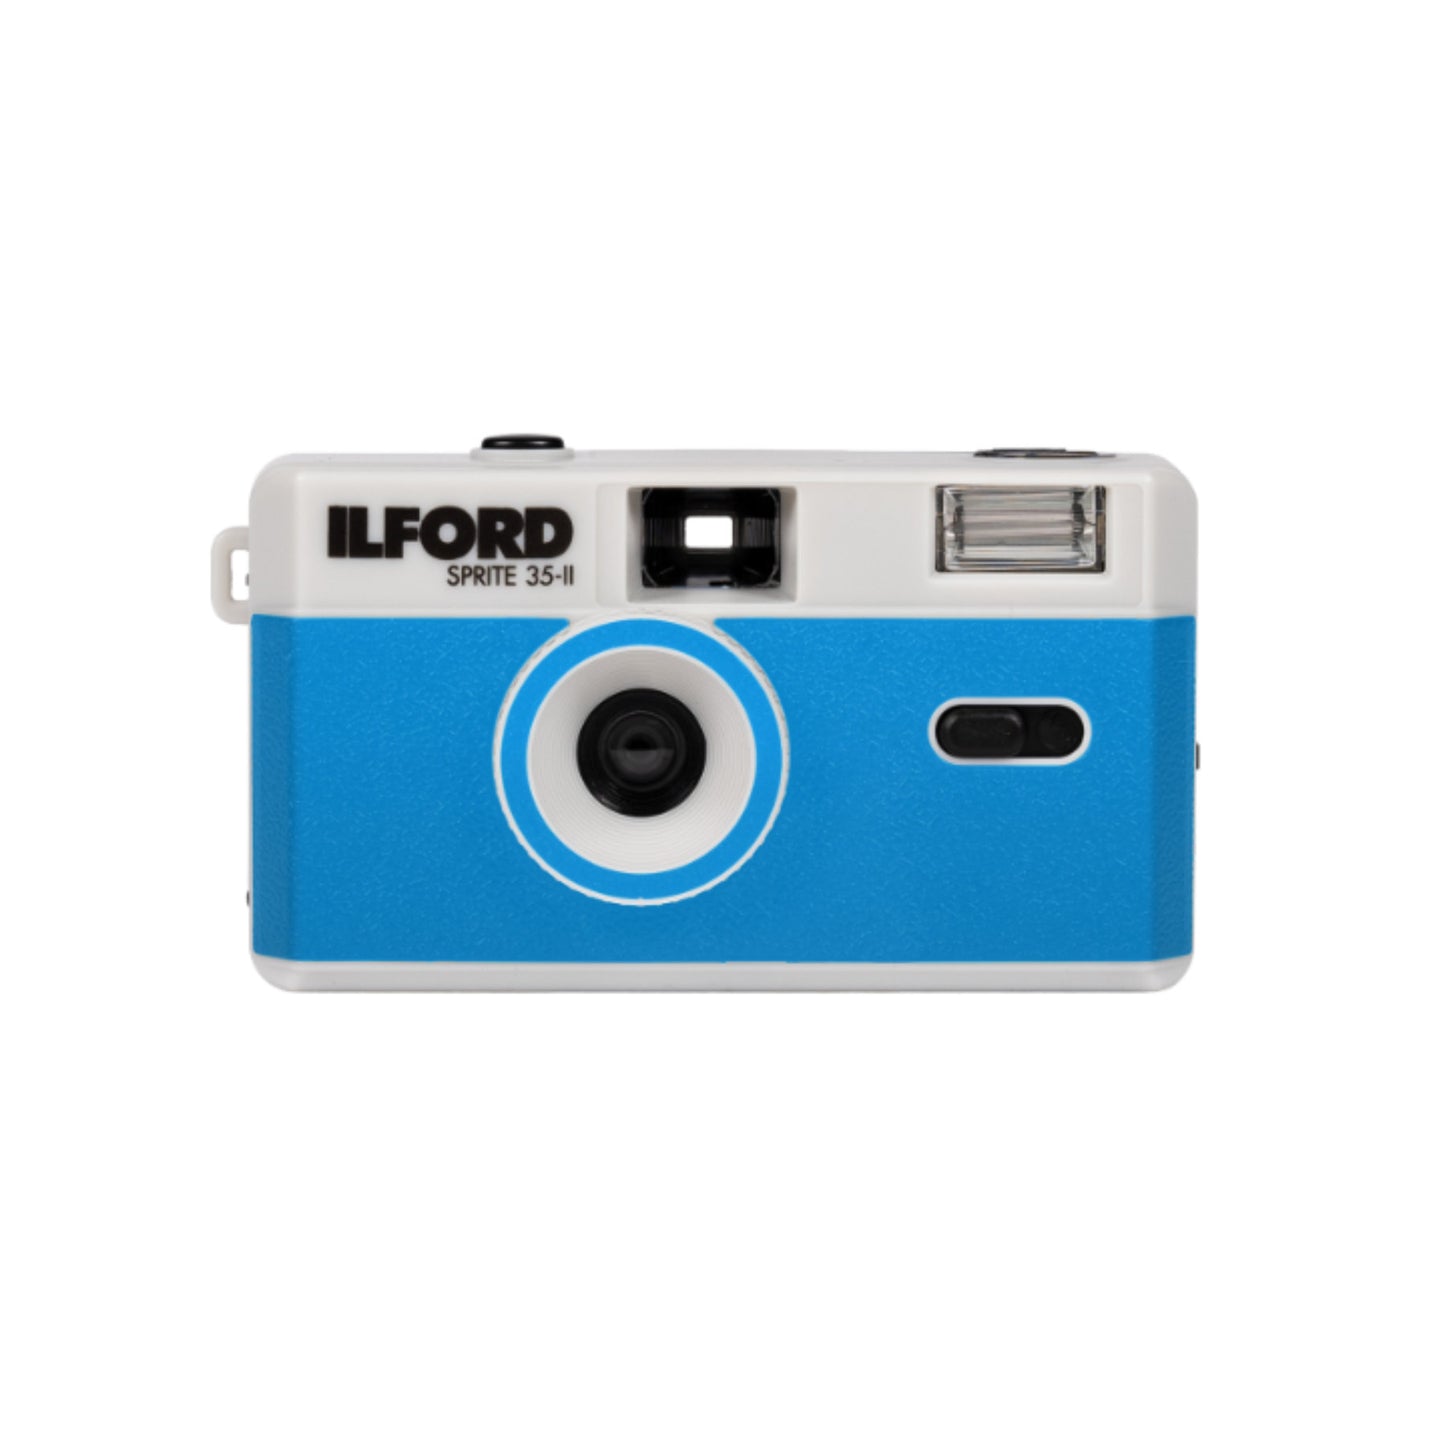 Buy ILFORD SPRITE 35-II reusable film camera - silver & blue at Topic Store